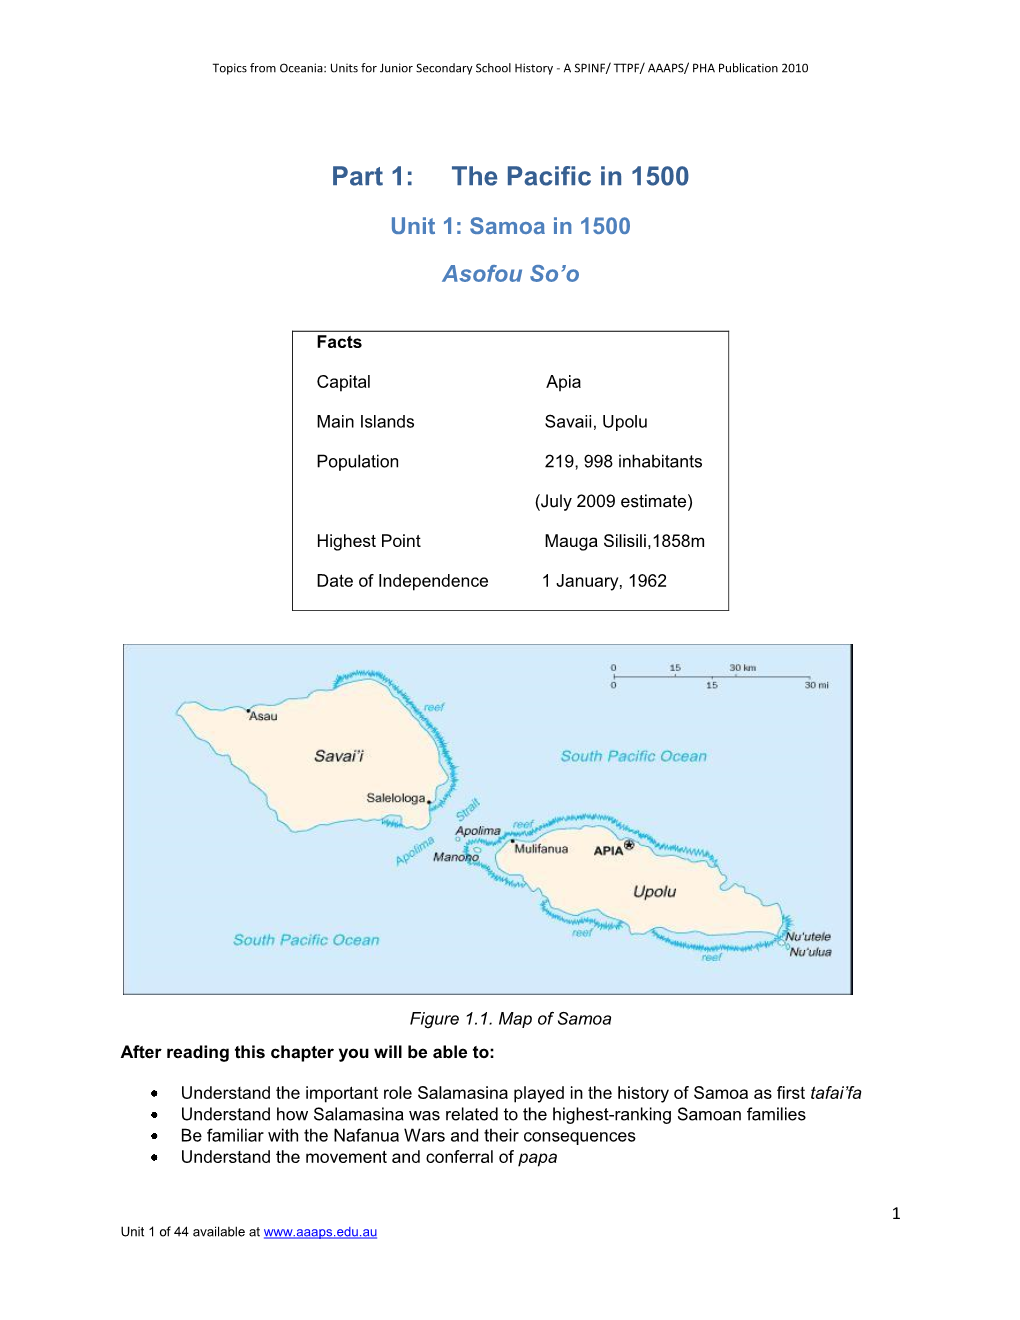 The Pacific in 1500